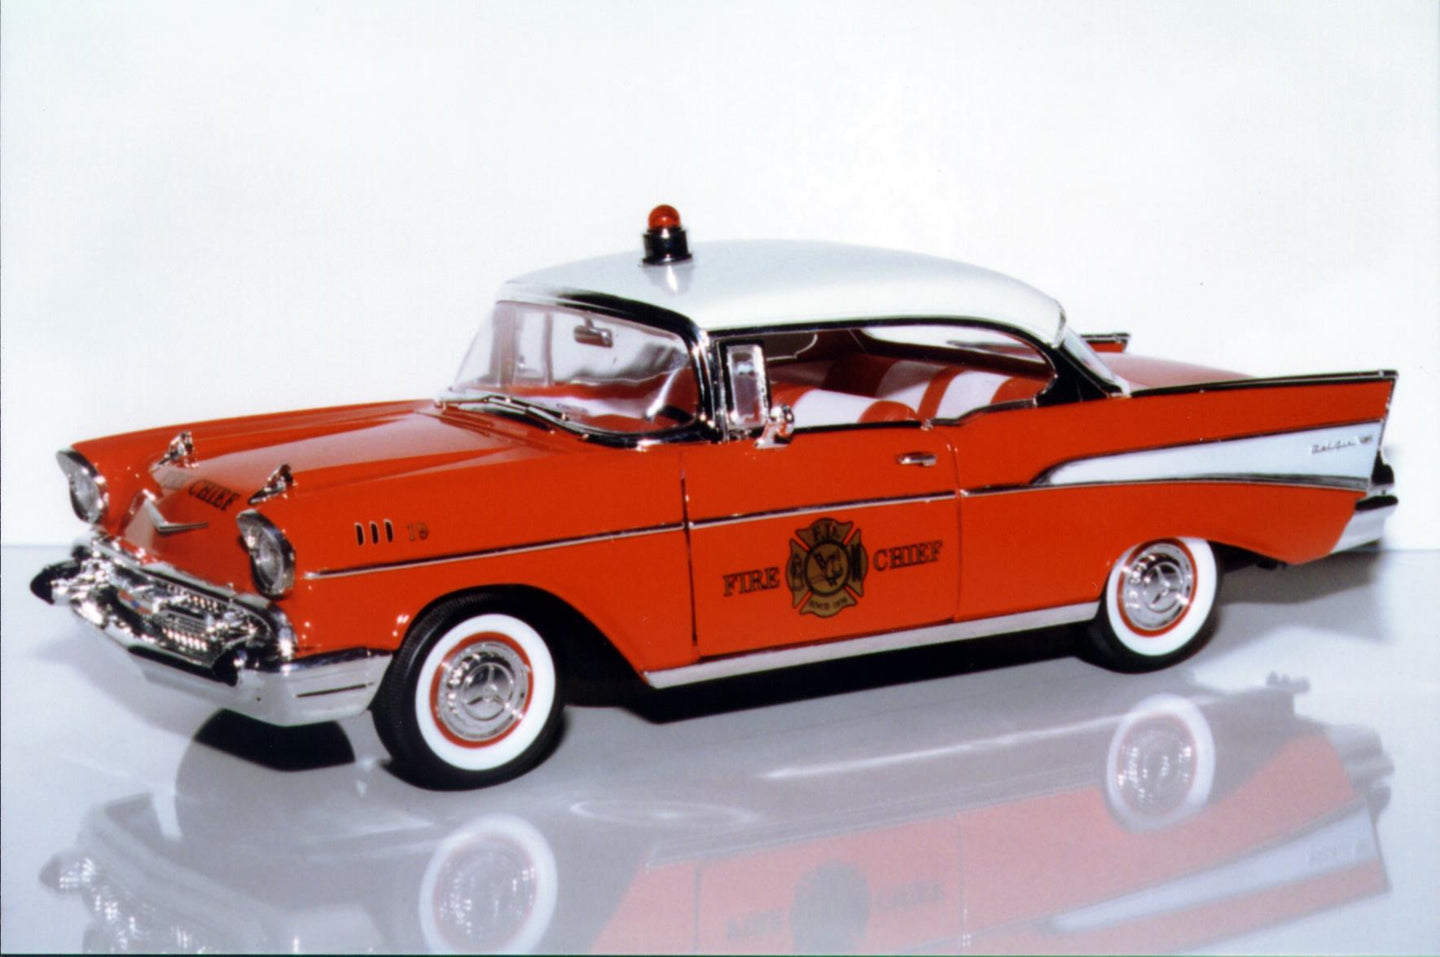 1:18 Yatming Chevy Bel Air '57 HT Fire Chief